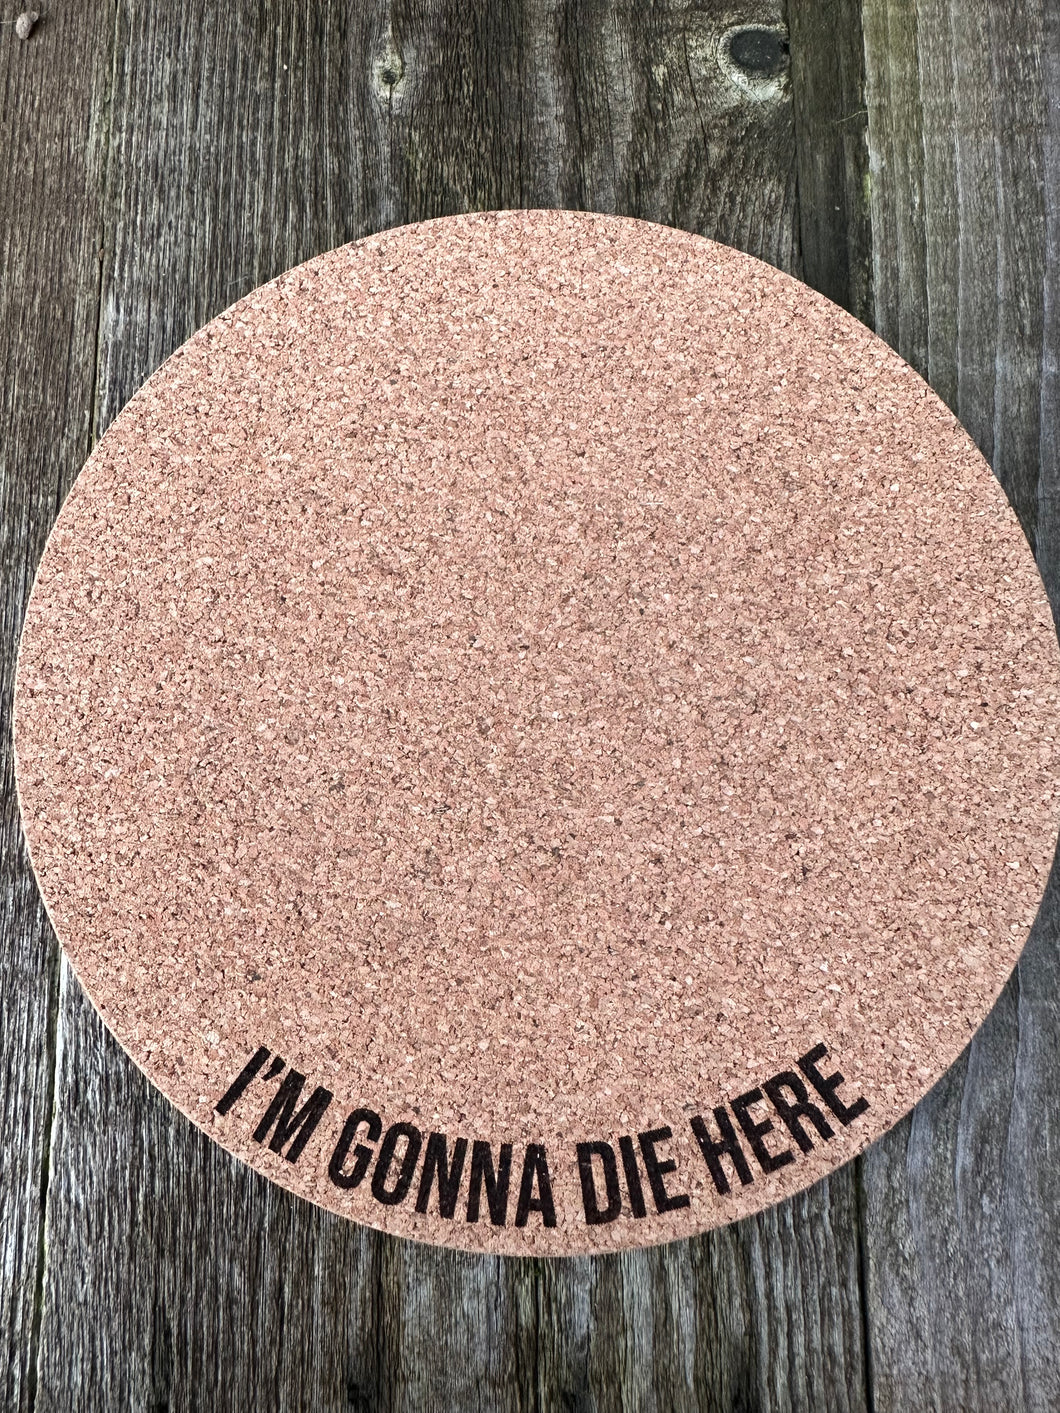 I'm Gonna Die Here Cork Plant Mat - Engraved Cork Round - Cork Bottom - No Plastic or Rubber - All Natural Material